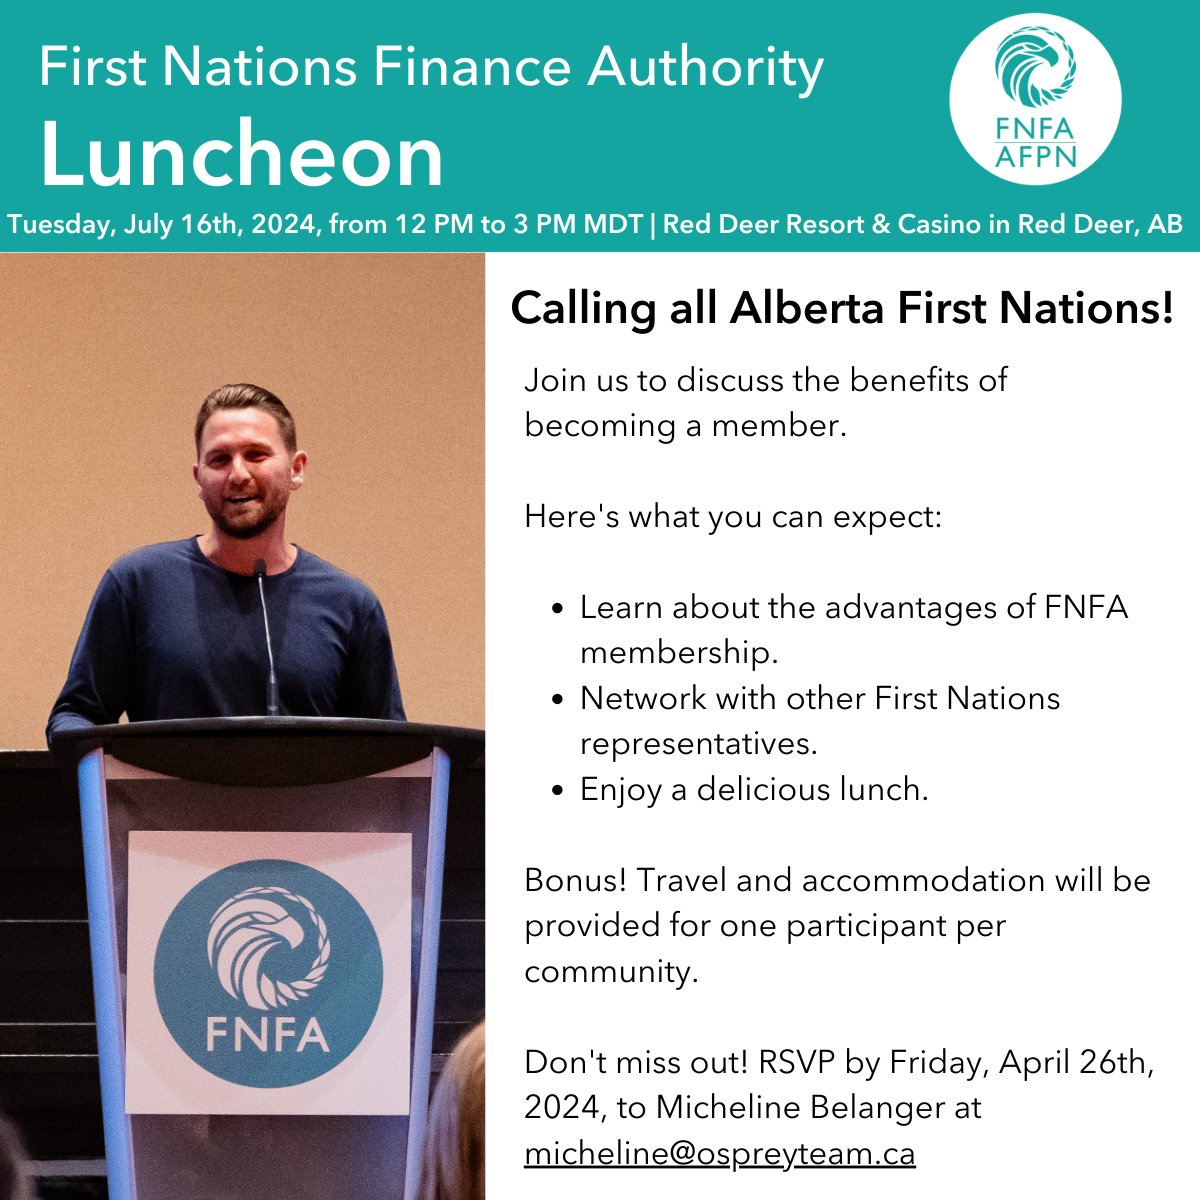 DEADLINE EXTENDED📢 Calling all Alberta First Nations! Join us on July 16th at Red Deer Resort & Casino from 12-3 pm to learn about the numerous benefits of FNFA membership. RSVP now! #FNFA #FirstNationsFinance #Alberta #AB #FirstNations #events